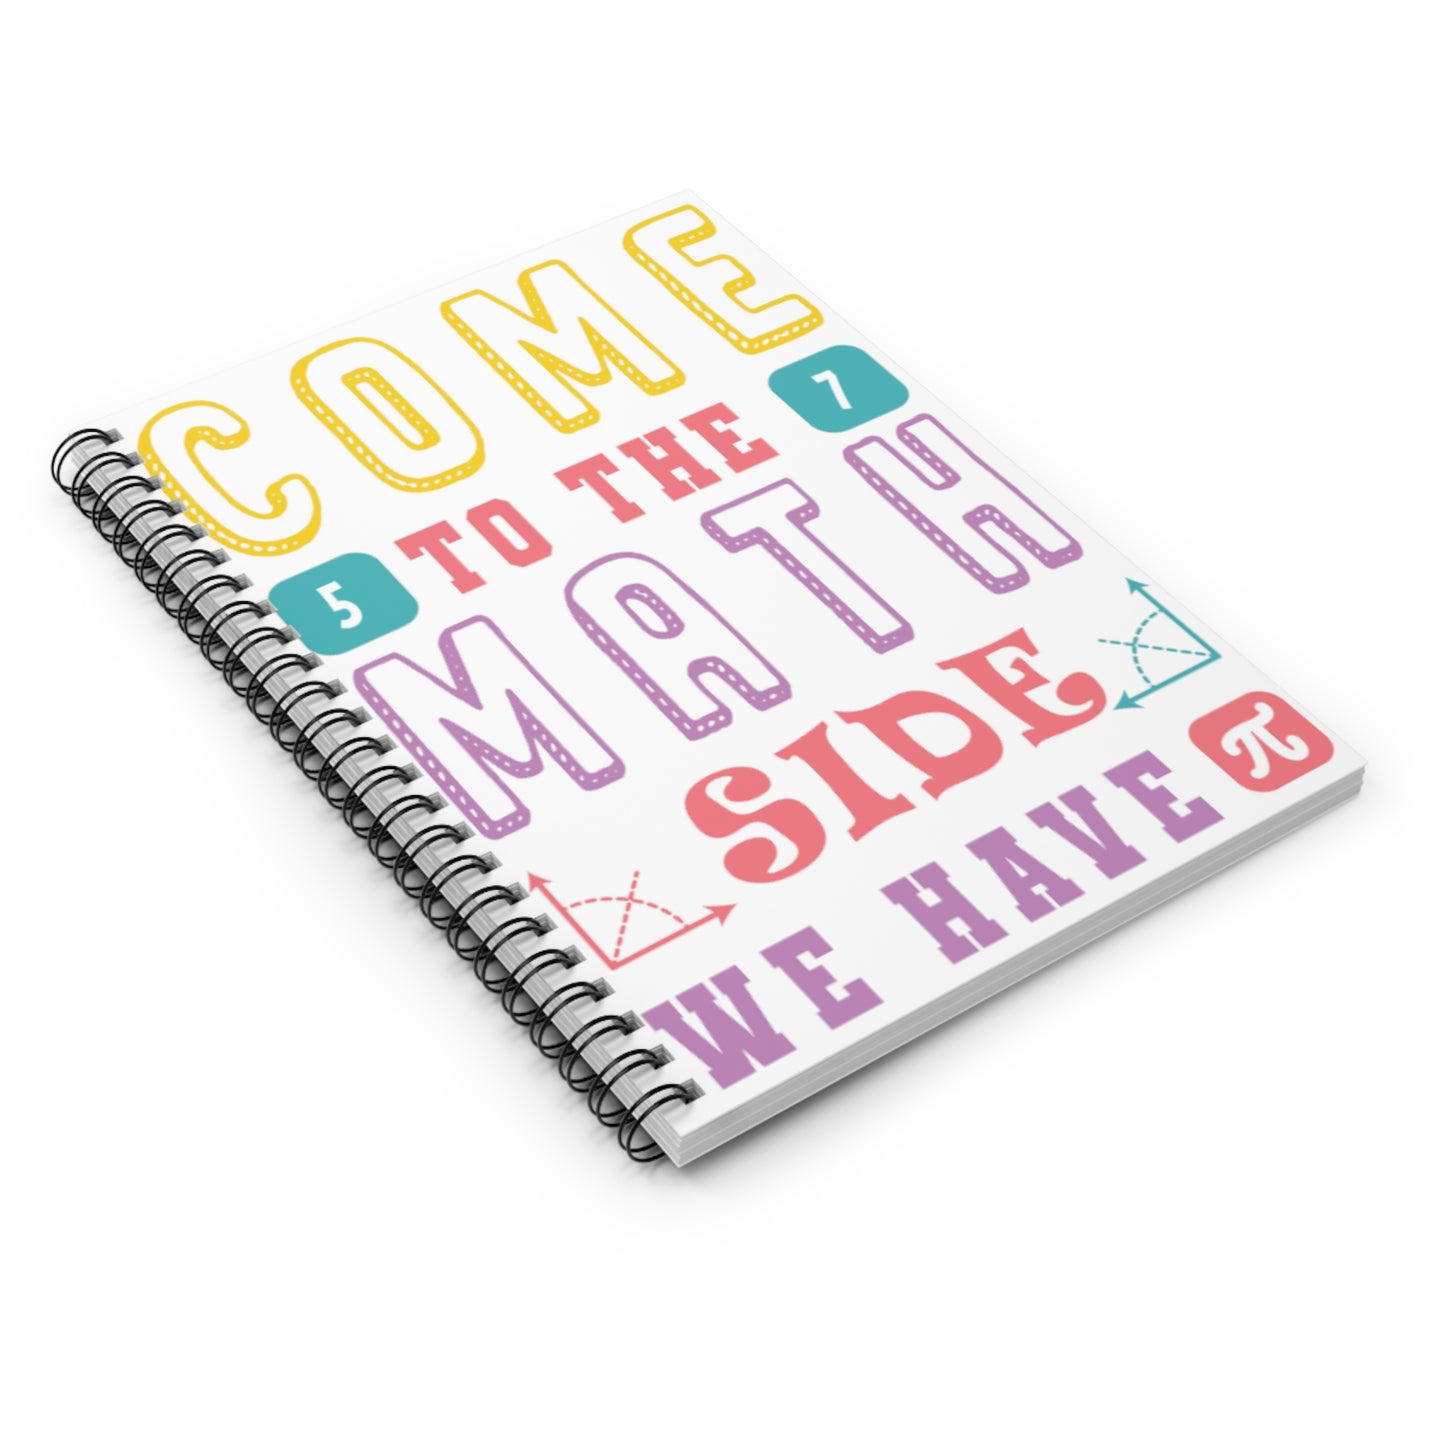 Come to the Math Side: Spiral Notebook - Log Books - Journals - Diaries - and More Custom Printed by TheGlassyLass